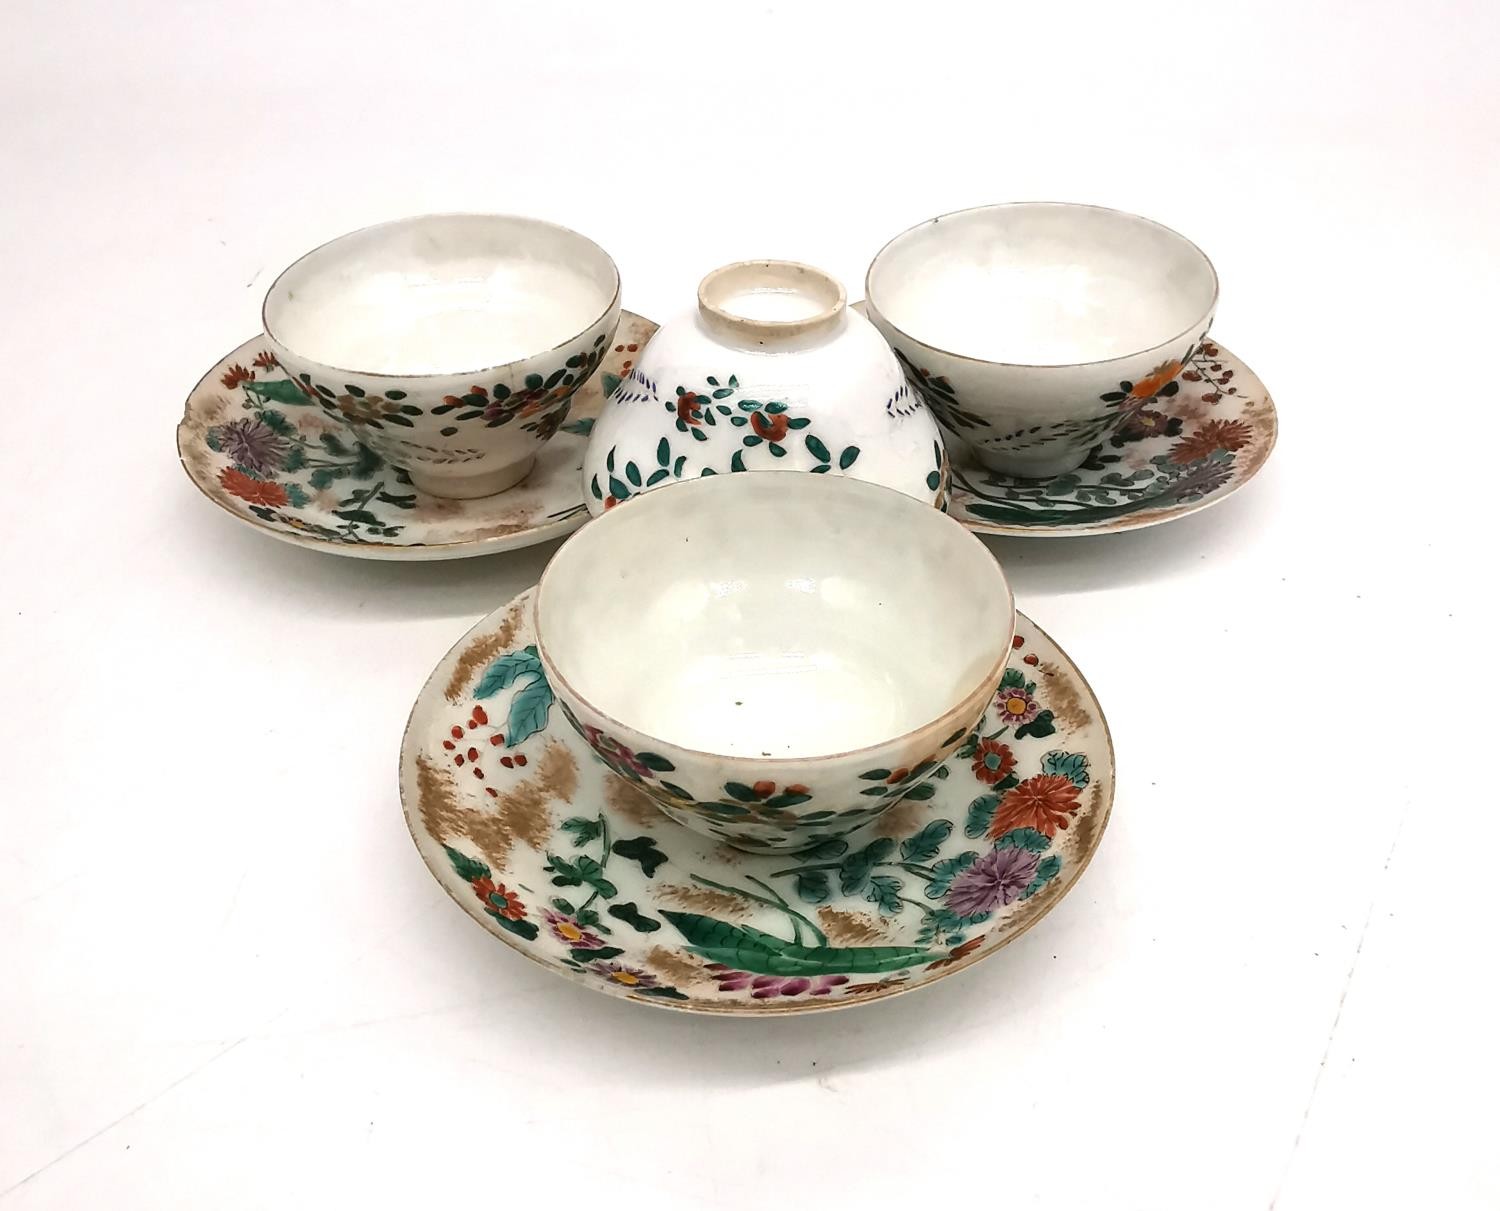 A collection of four Famille rose style egg shell porcelain hand painted tea bowls and three